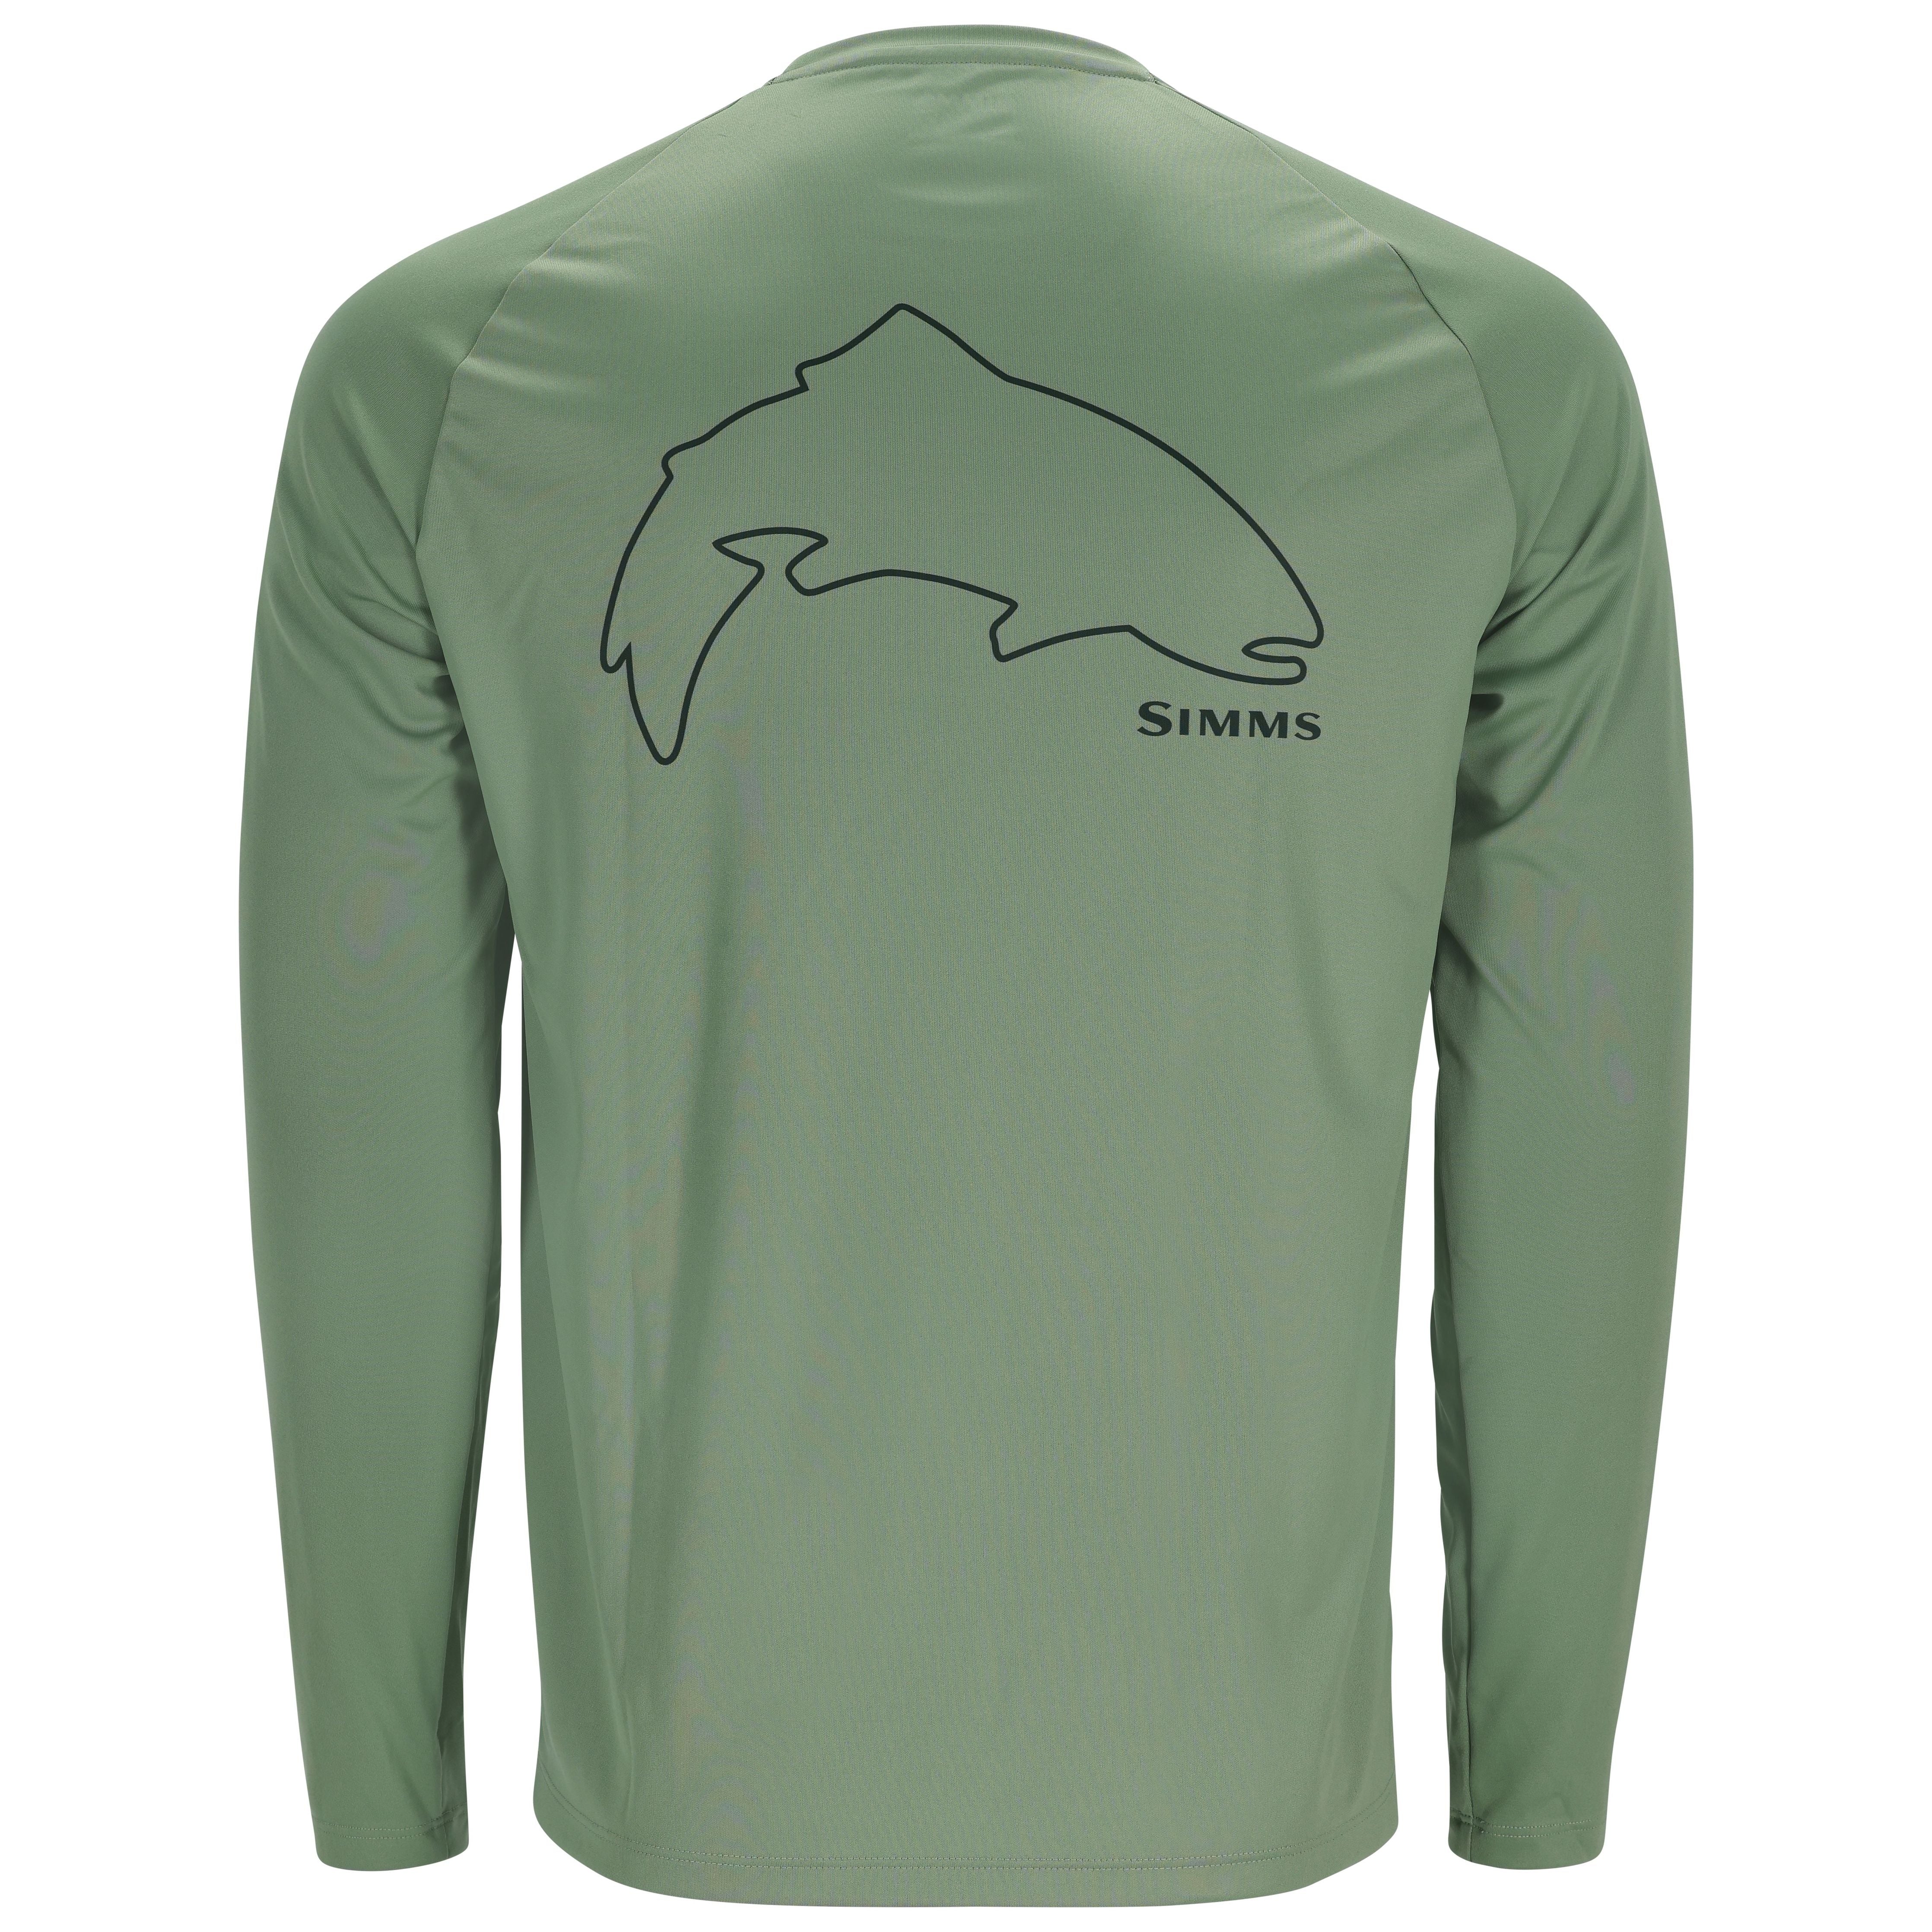 Simms Tech Tee - Artist Series Trout Outline/Field Image 01